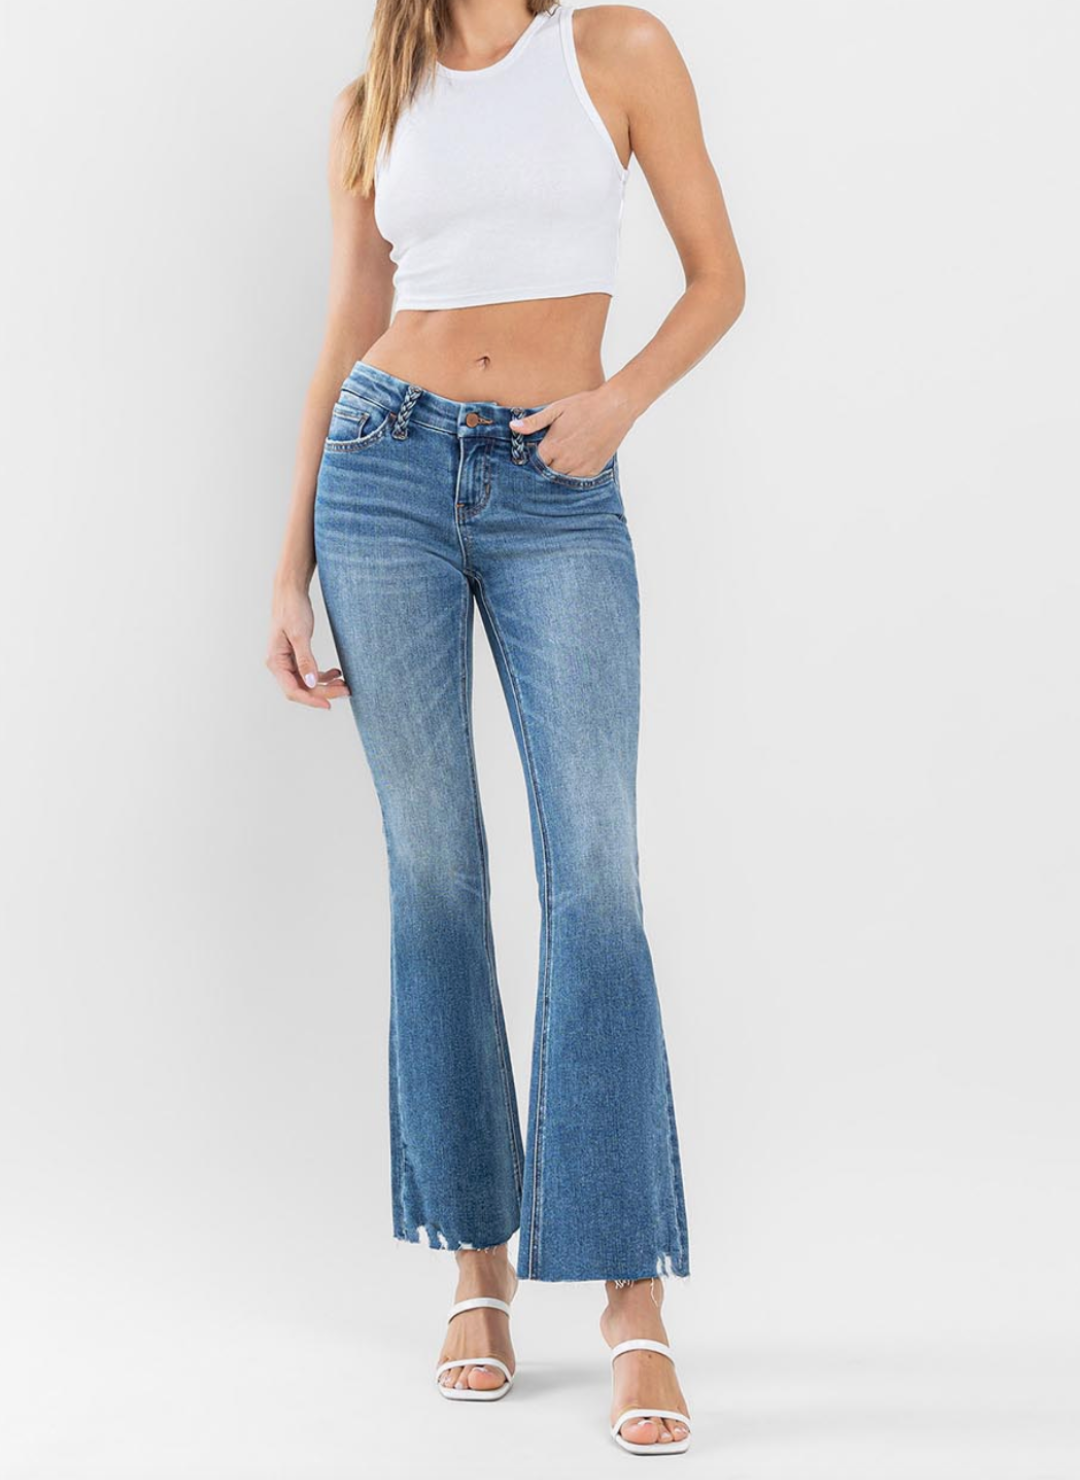 Model wearing FM Low Rise Flare jeans with braided belt loops and raw edge finish.